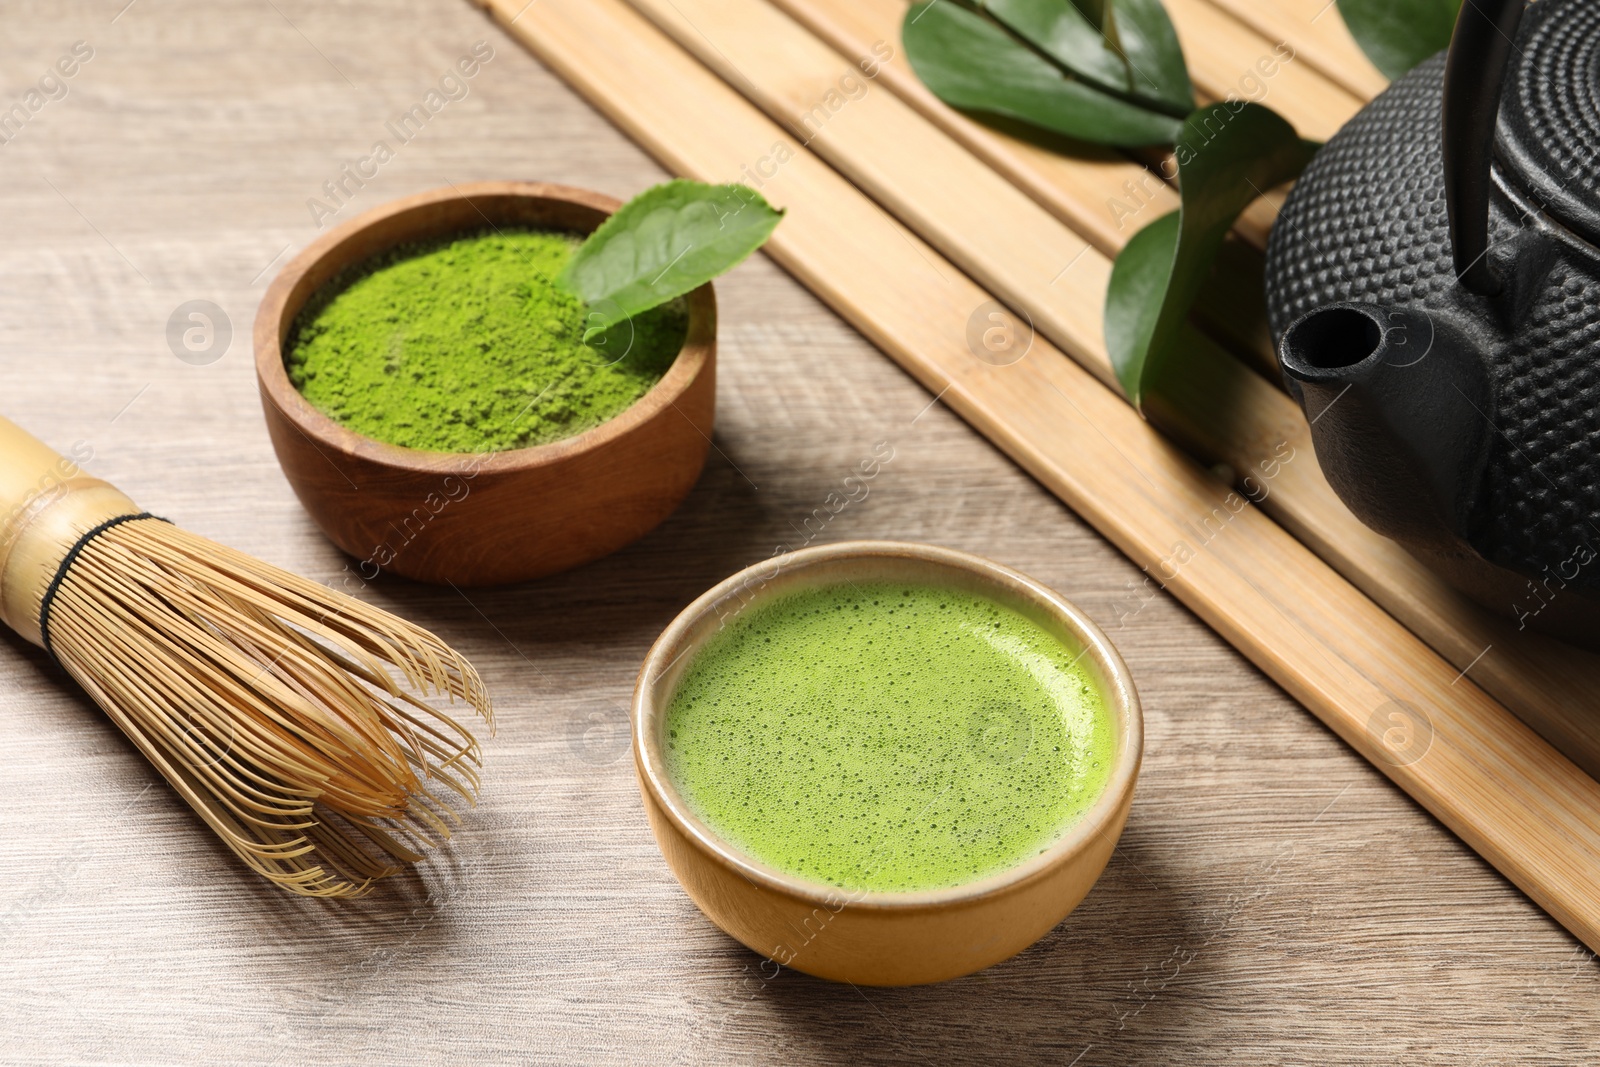 Photo of Cup of fresh matcha tea, bamboo whisk, teapot and green powder on wooden table